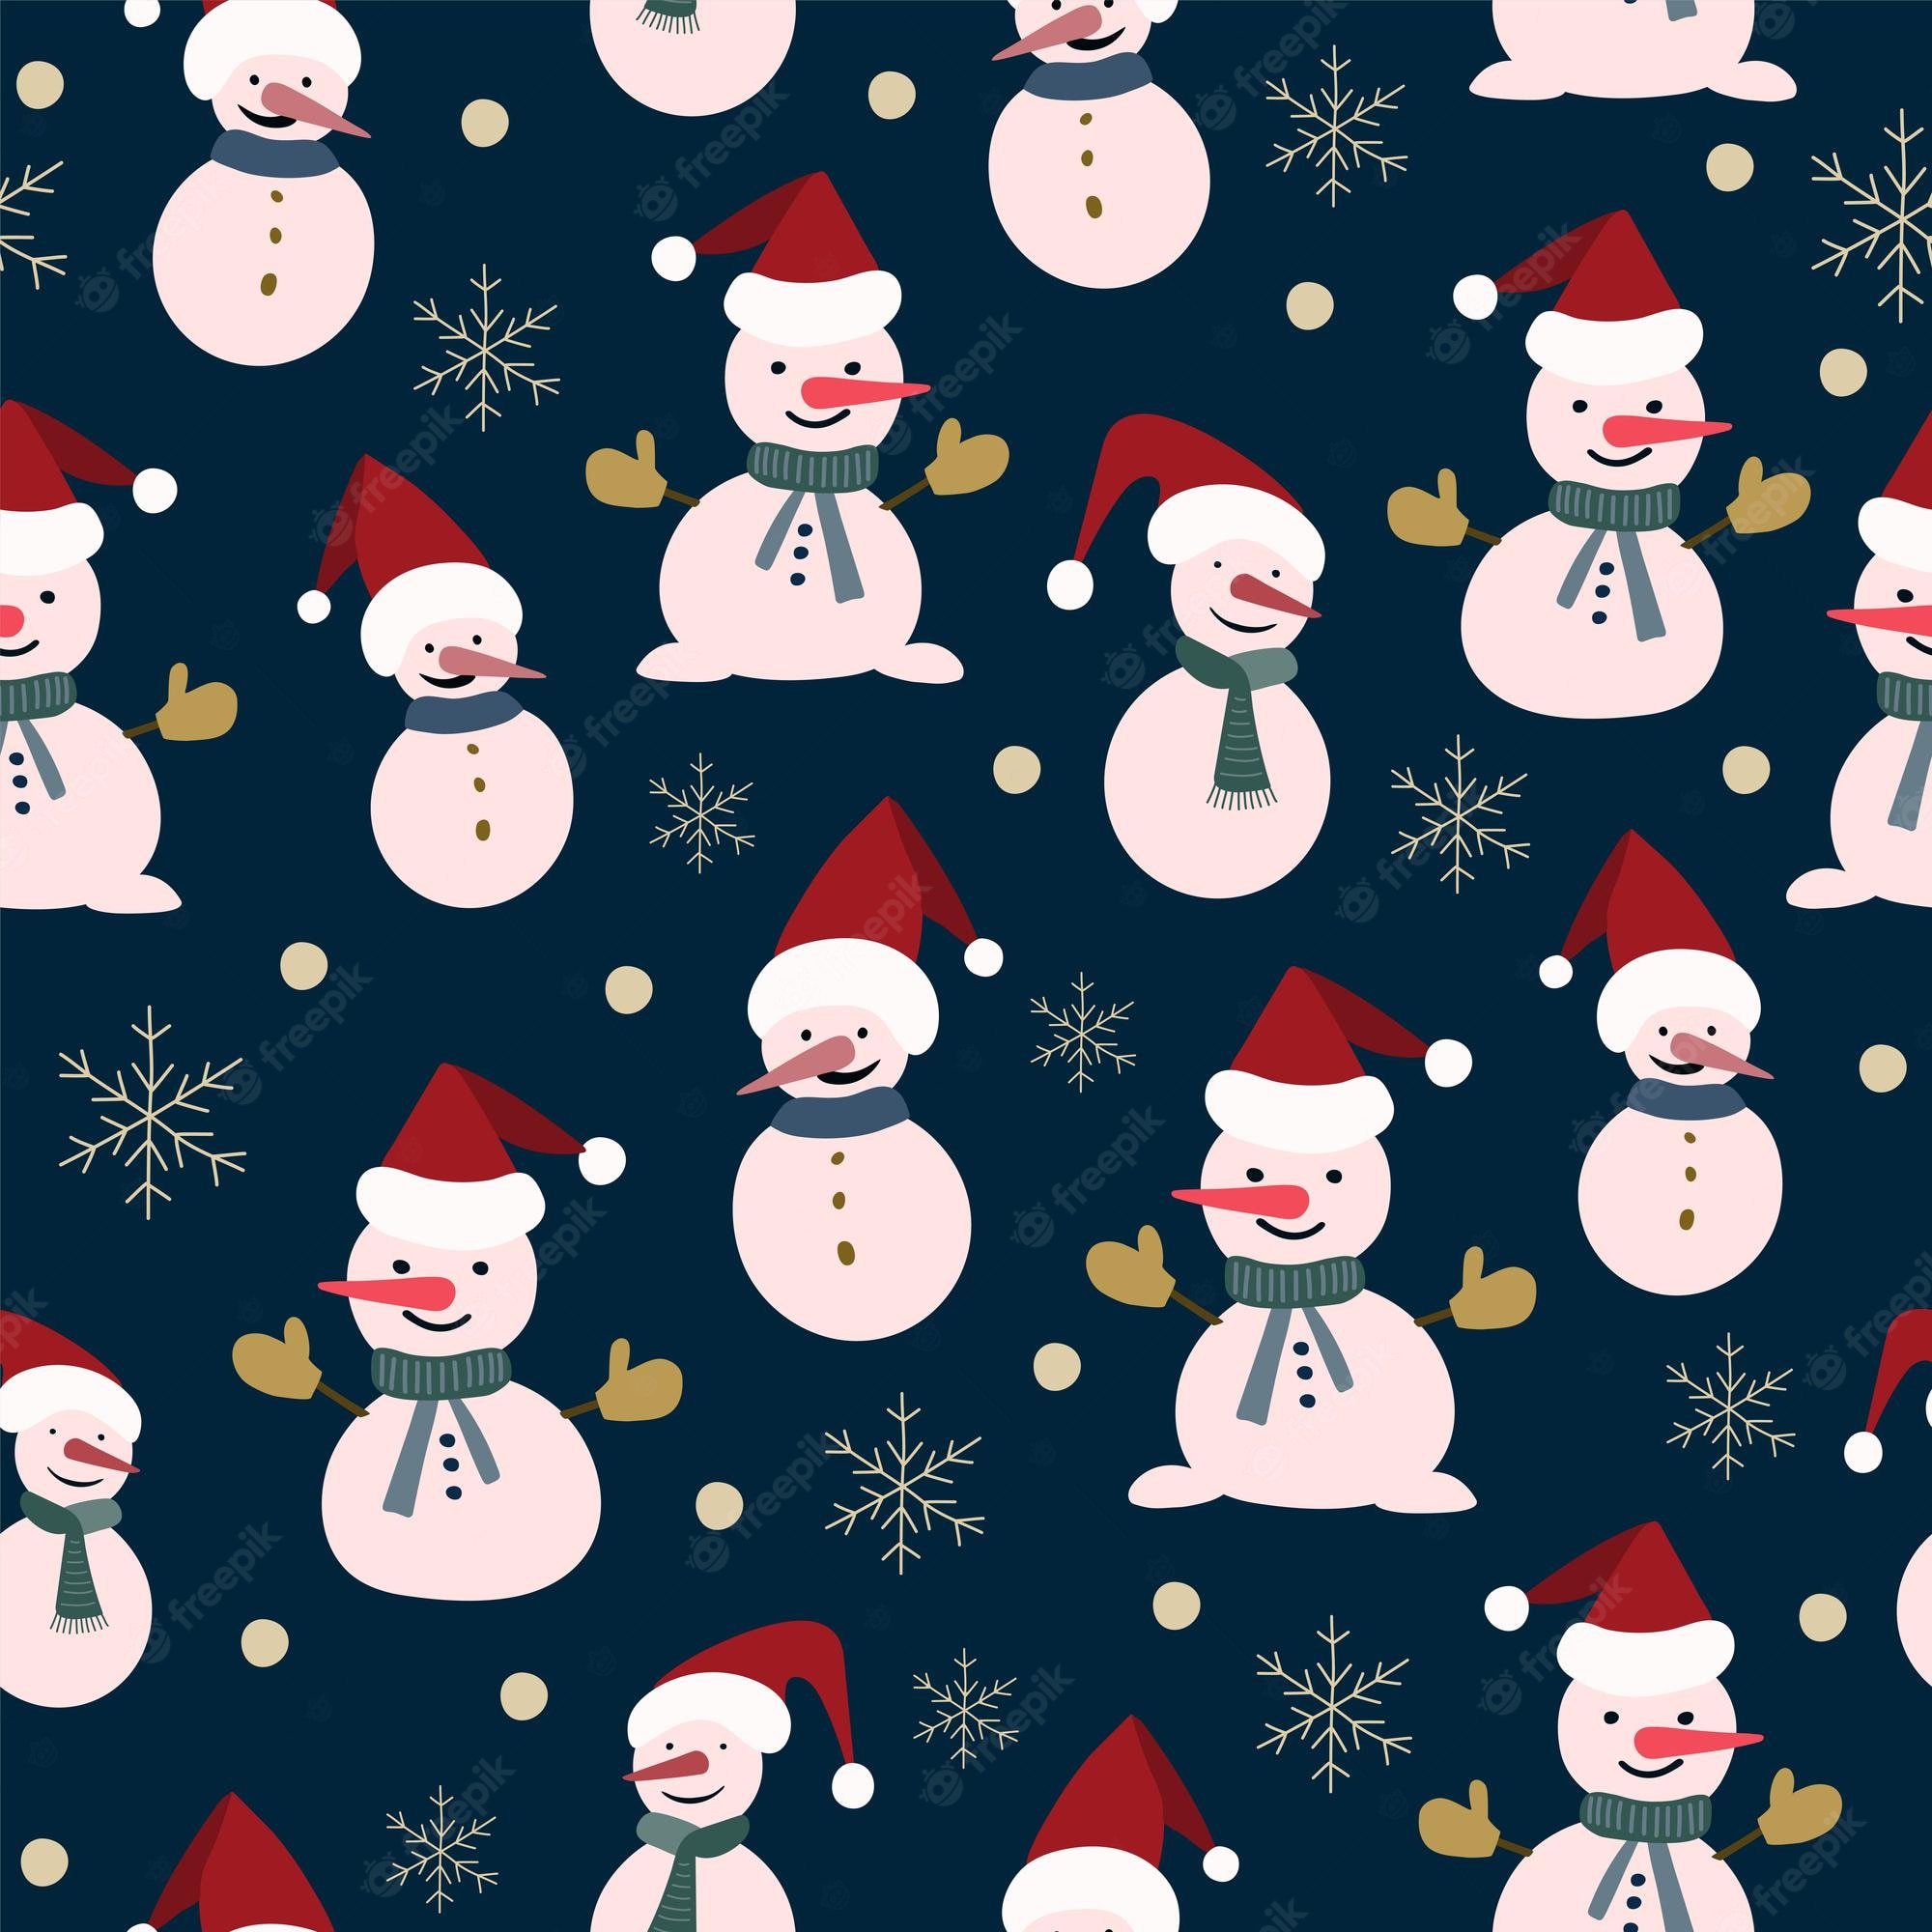 Premium Vector Seamless Christmas Nature Pattern Winter Forest